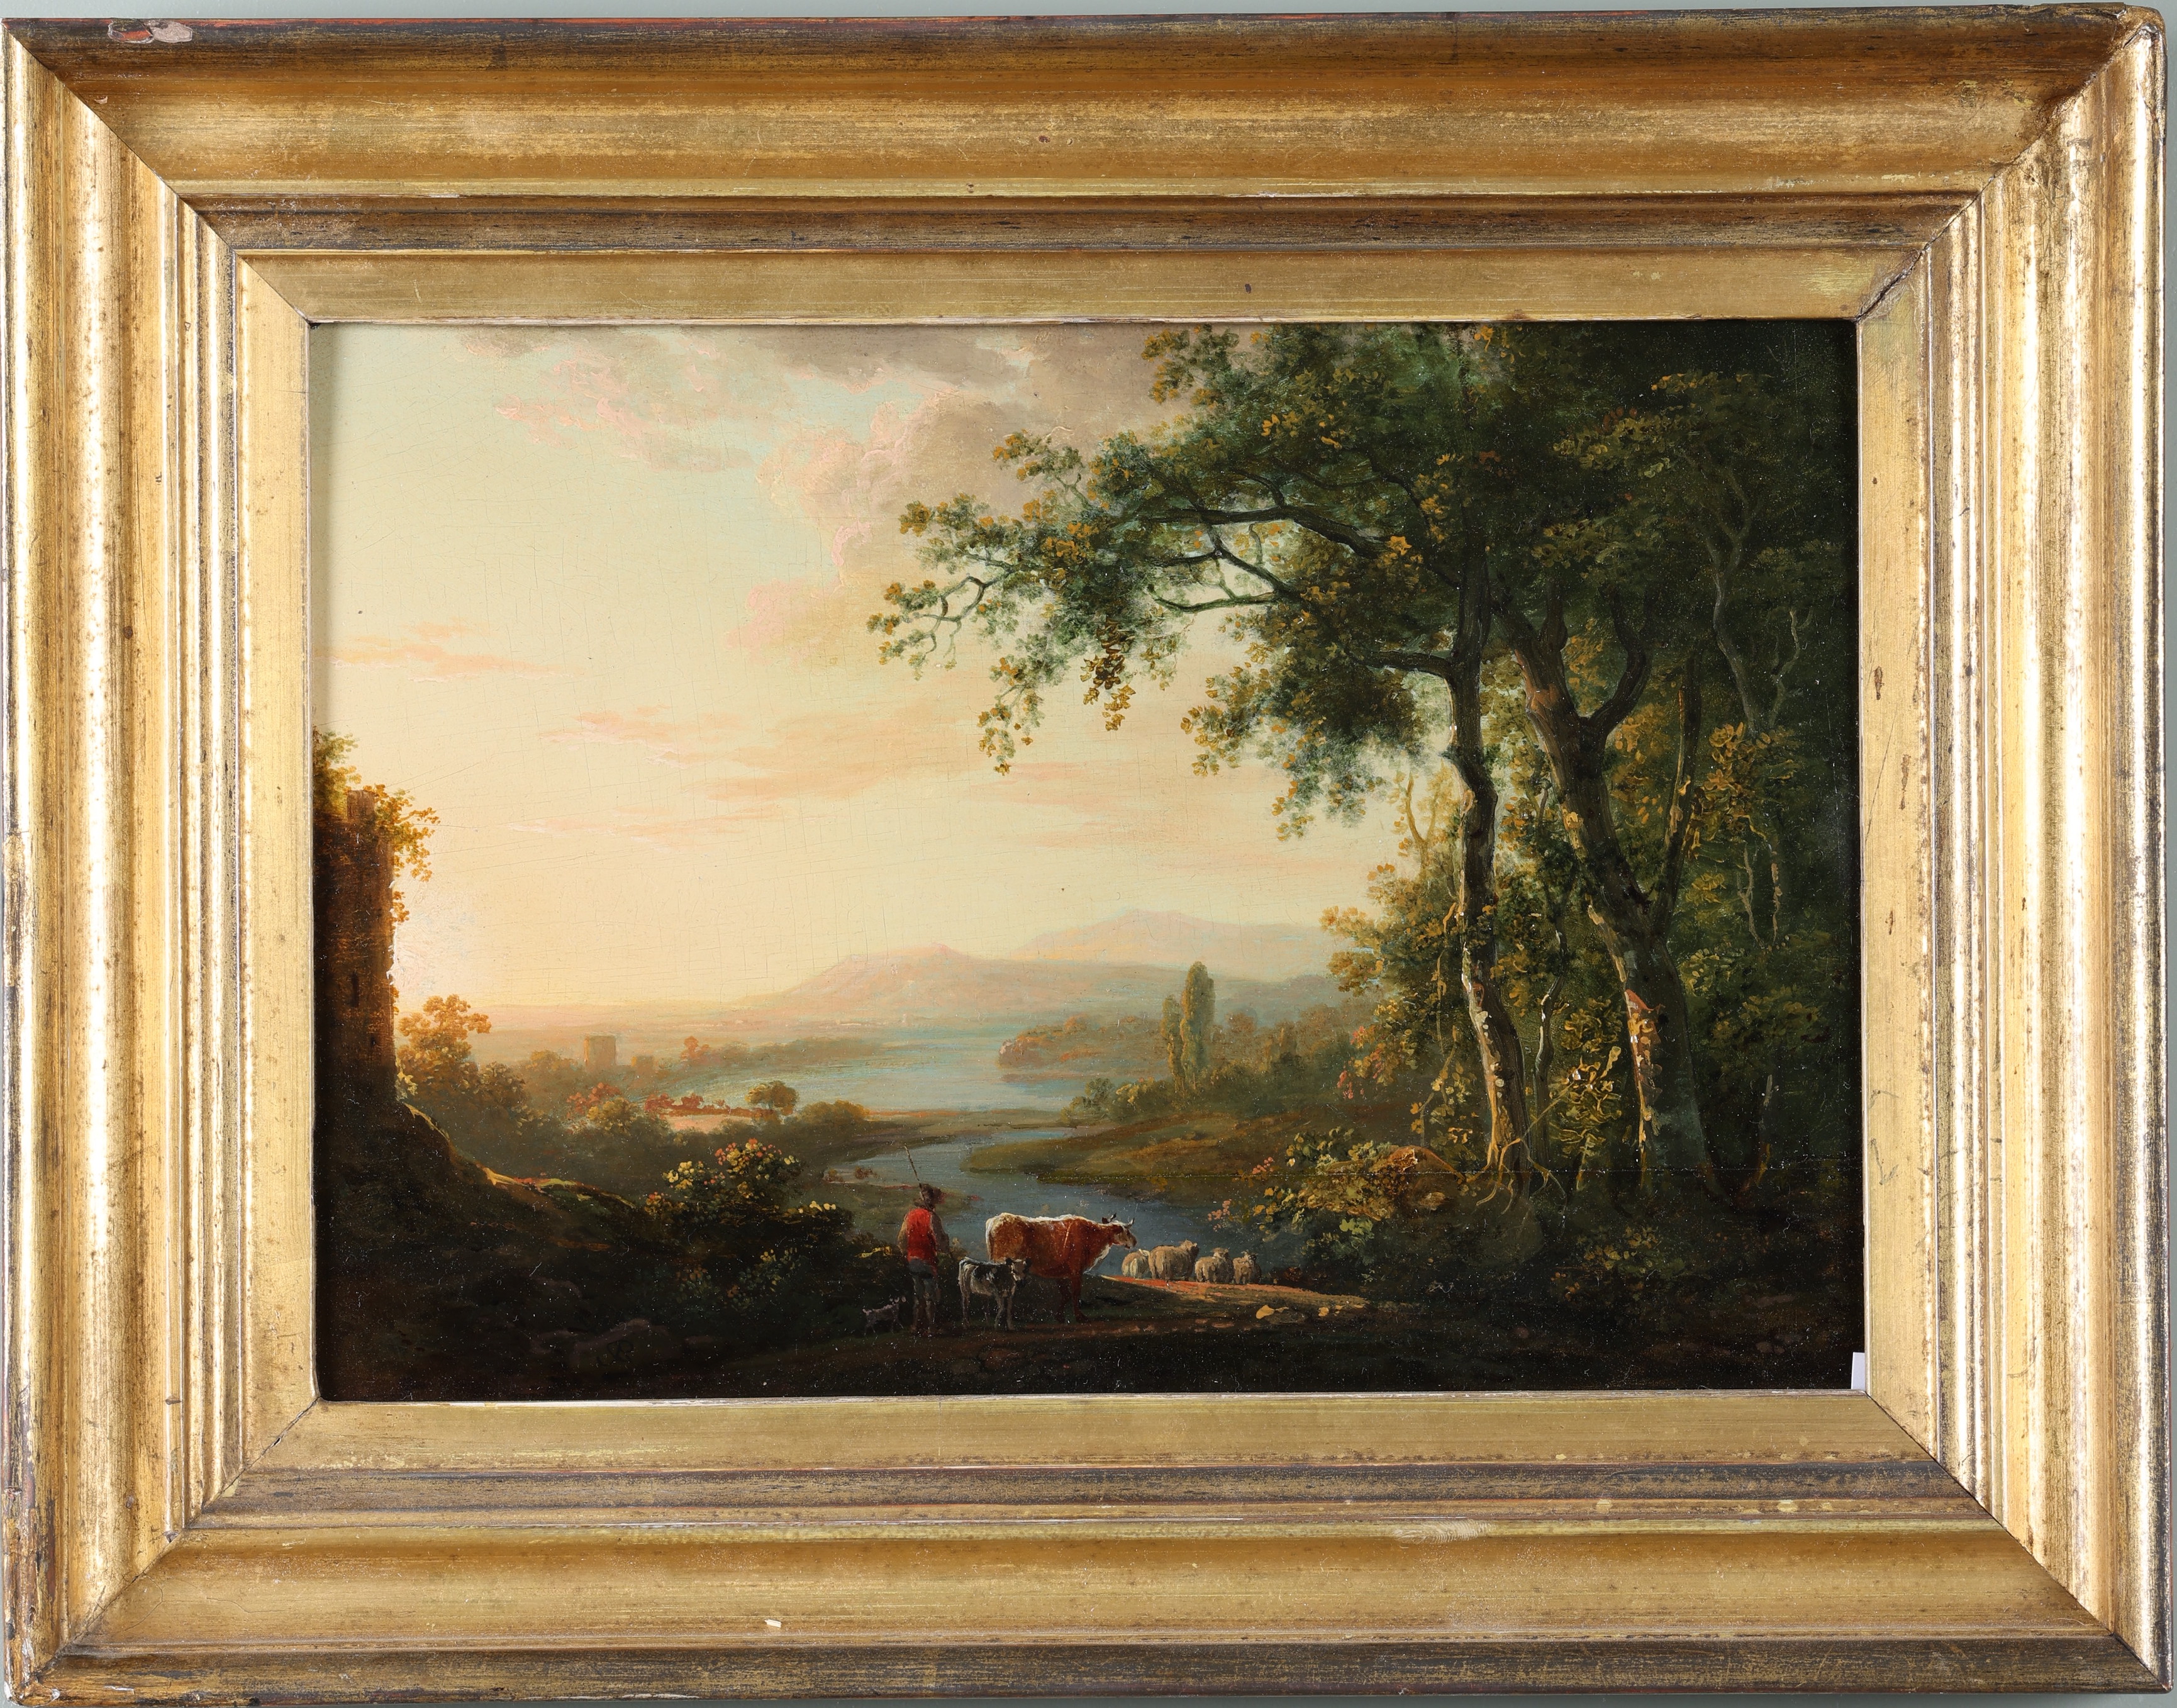 Abraham Pether, Sr. (1756-1812), A Pair of Arcadian Landscapes - Image 2 of 5